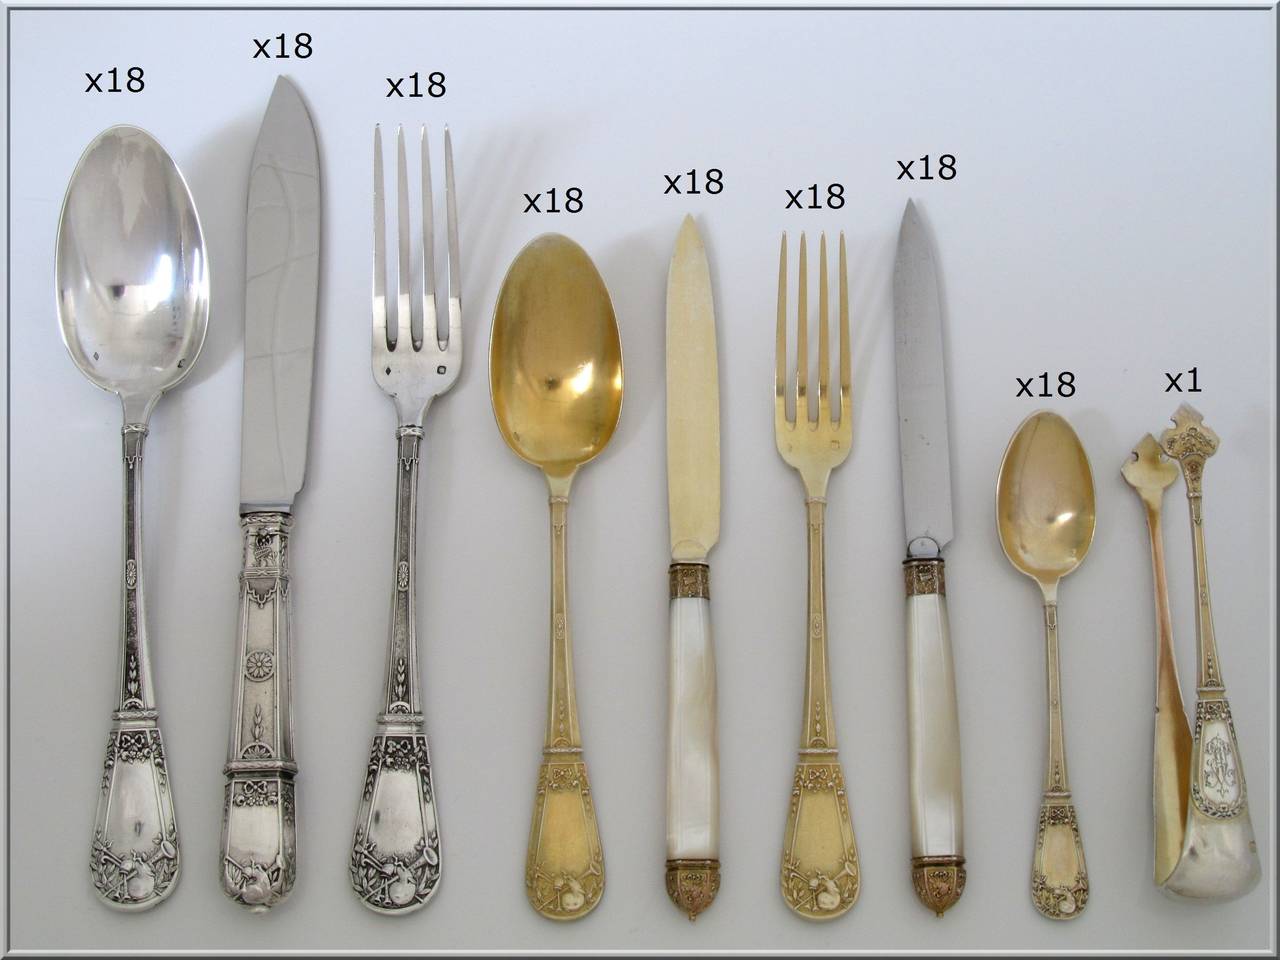 CANAUX French Sterling Silver Vermeil Flatware Set 145 pc with original chest Musical Instruments pattern

Head of Minerve 1 st titre for 950/1000 French Sterling Silver Vermeil guarantee 

Fabulous French Sterling Silver flatware 145 pc with